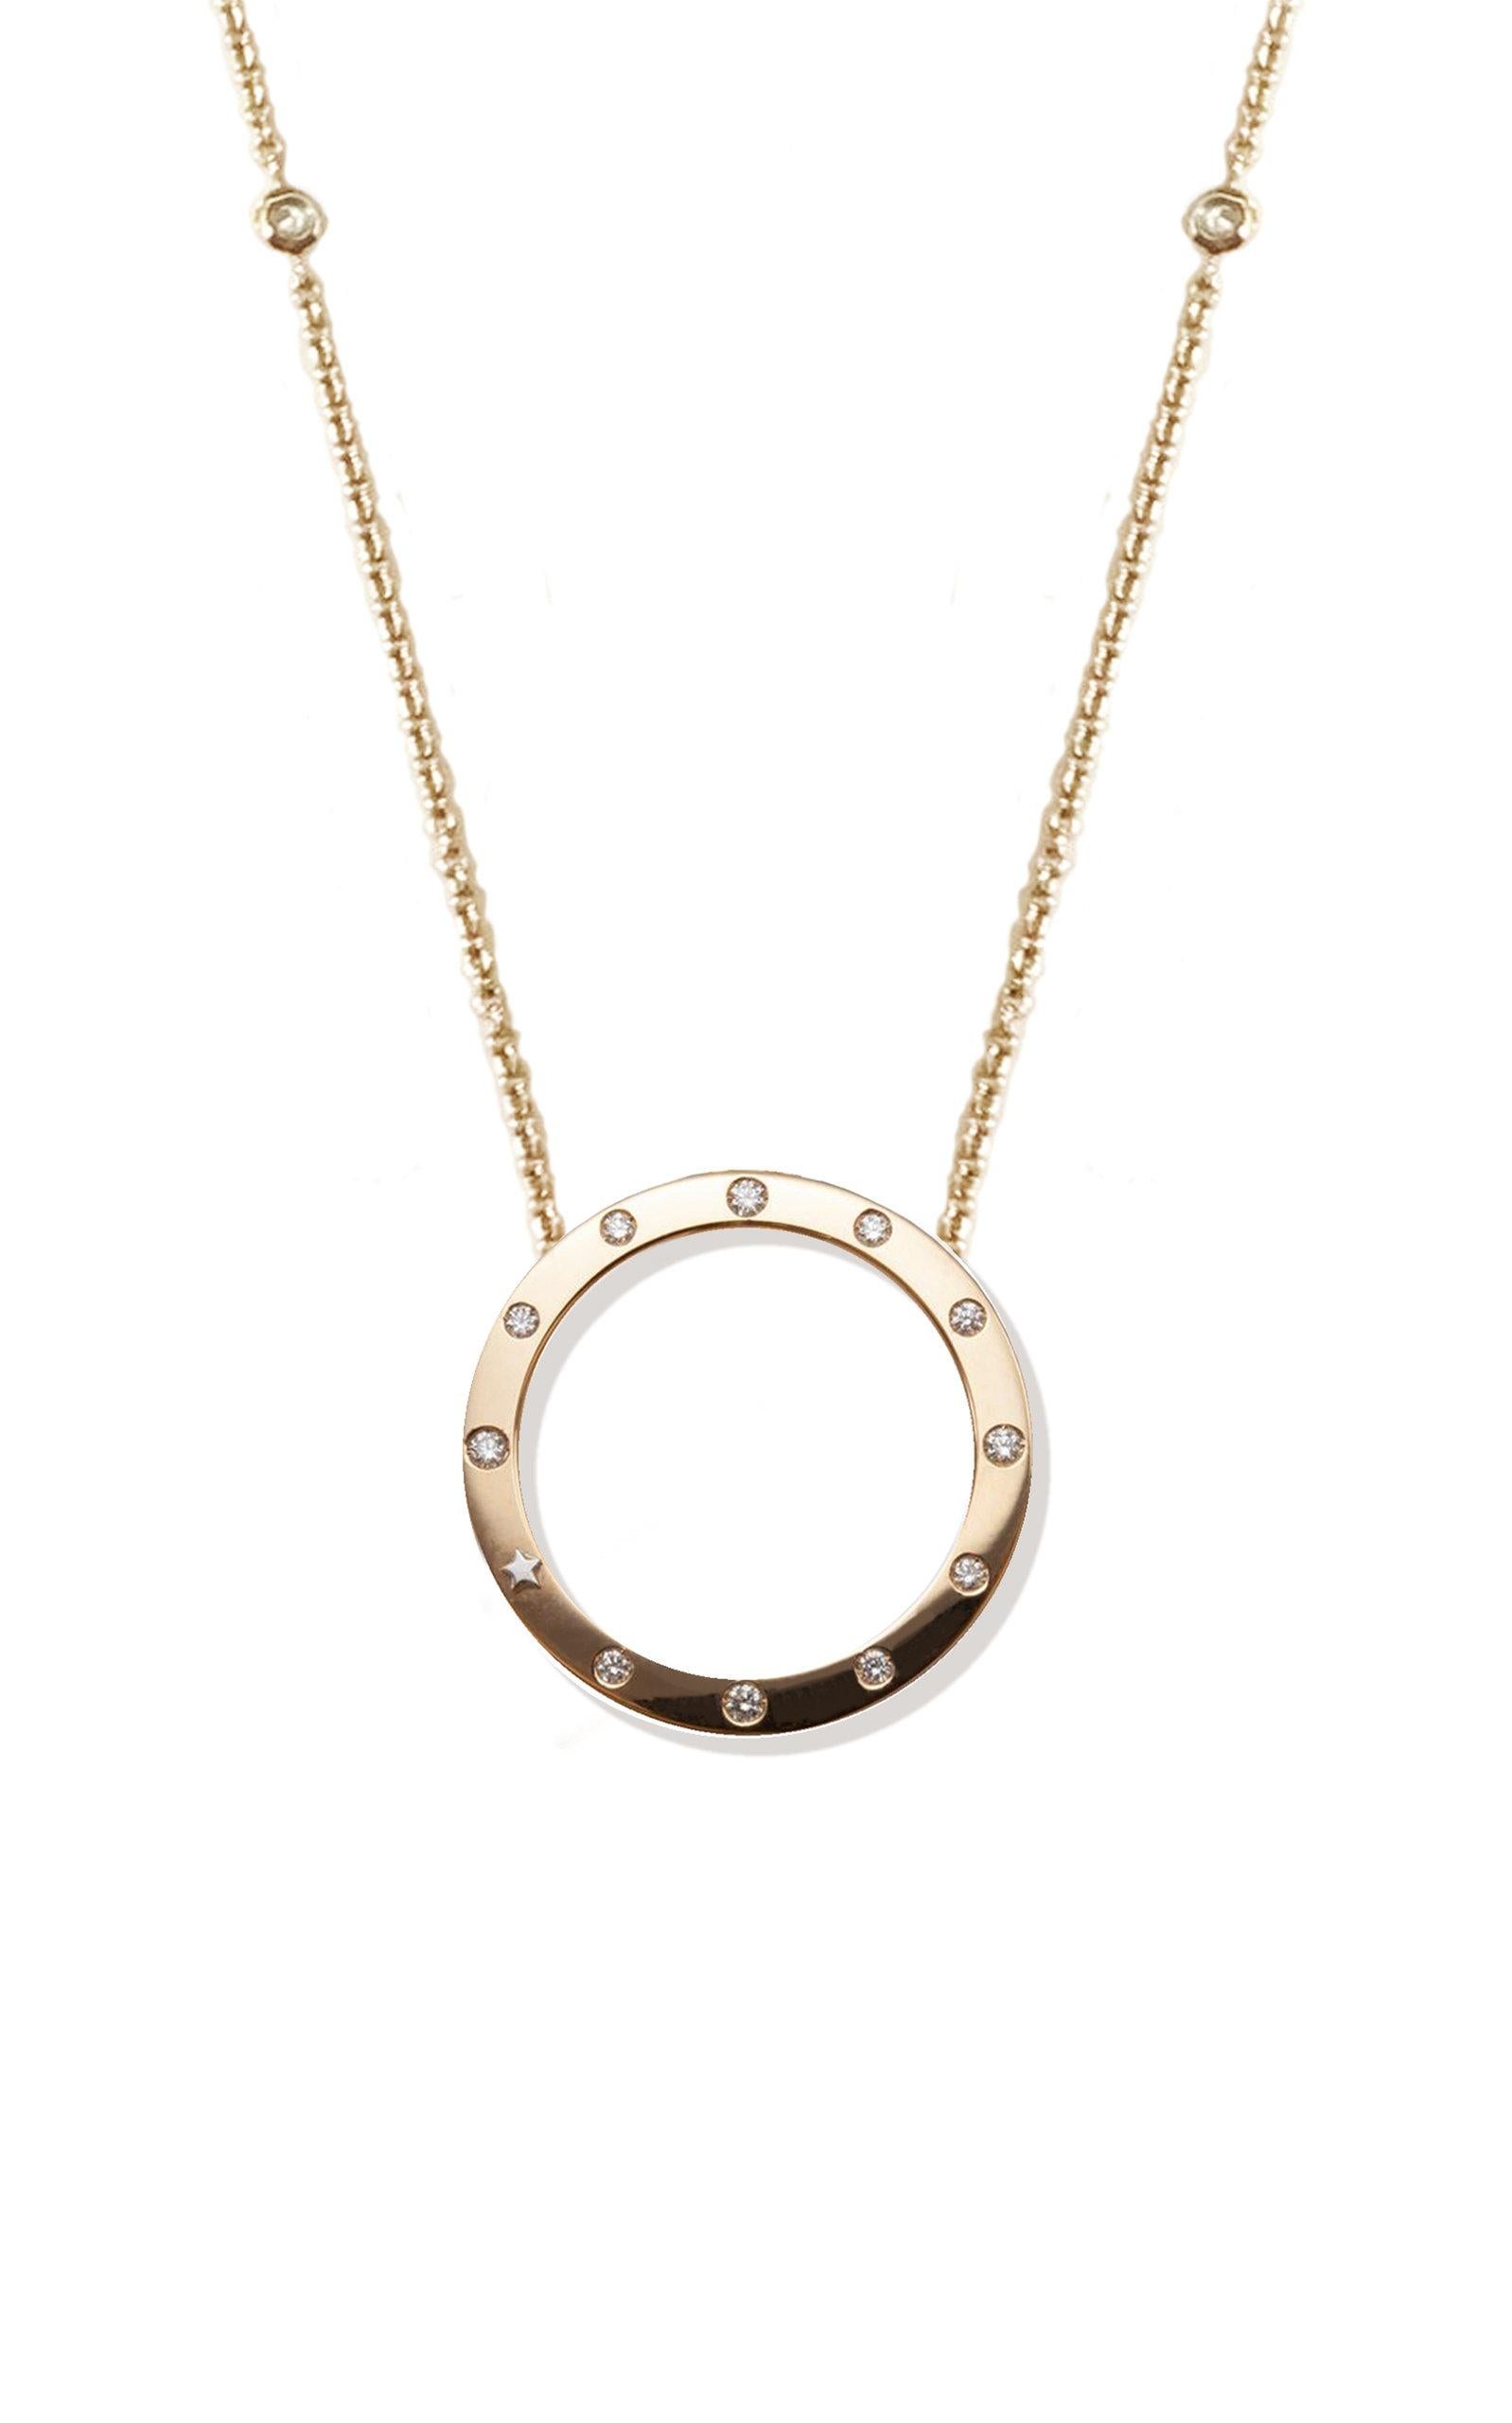 Inspired by the concept of time, Anna Maccieri Rossi's 'ORA Pendant' features an open circle pendant at center on a yellow gold chain. The 11 diamonds and a gold star at 8 o'clock around the rim mark each hour of the day.
PRODUCT DETAILS
Clasp